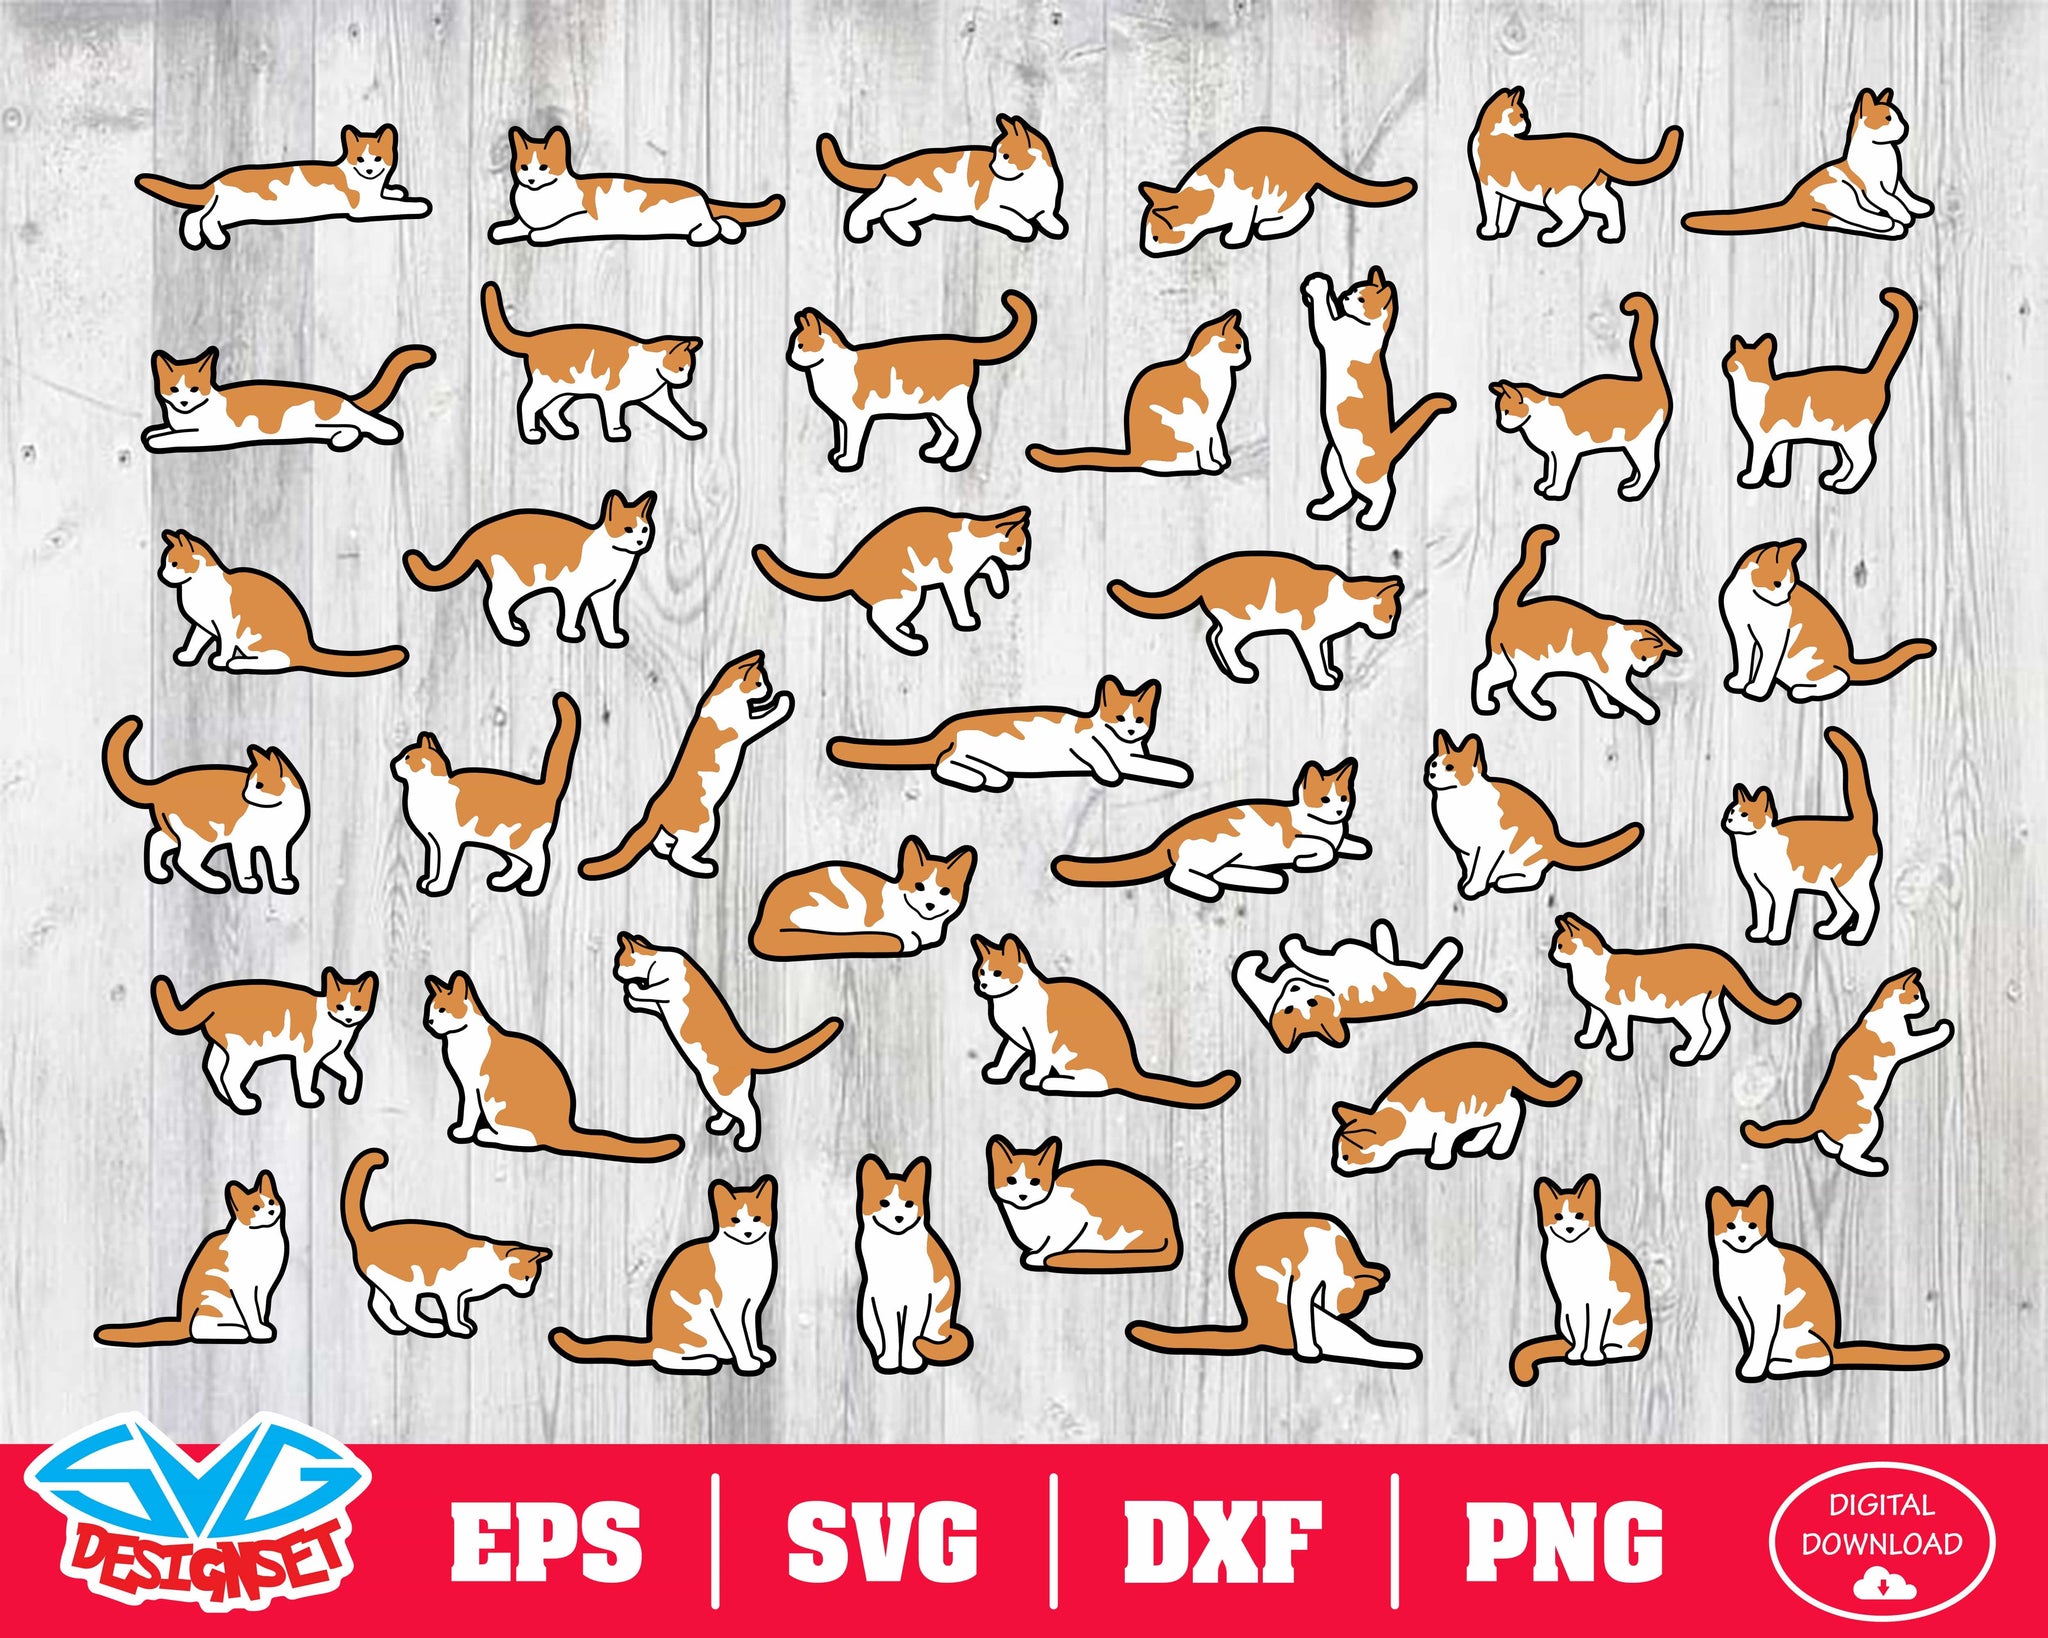 Cat Svg, Dxf, Eps, Png, Clipart, Silhouette and Cutfiles #2 - SVGDesignSets